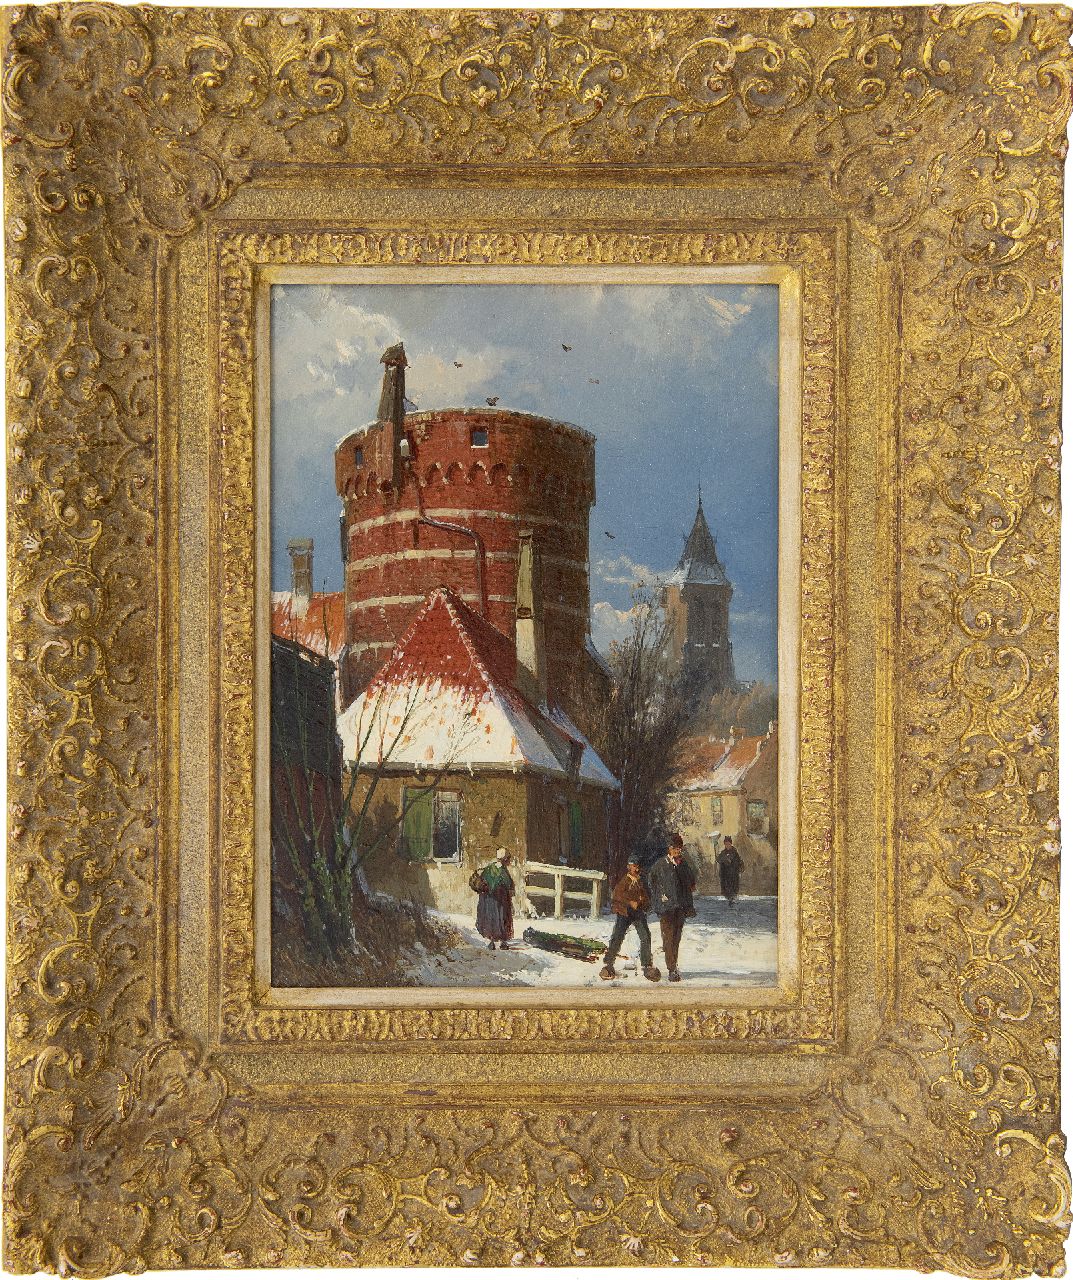 Koekkoek W.  | Willem Koekkoek | Paintings offered for sale | Dutch street with an old fortress tower, in the snow, oil on panel 24.3 x 17.9 cm, painted 1862-1865